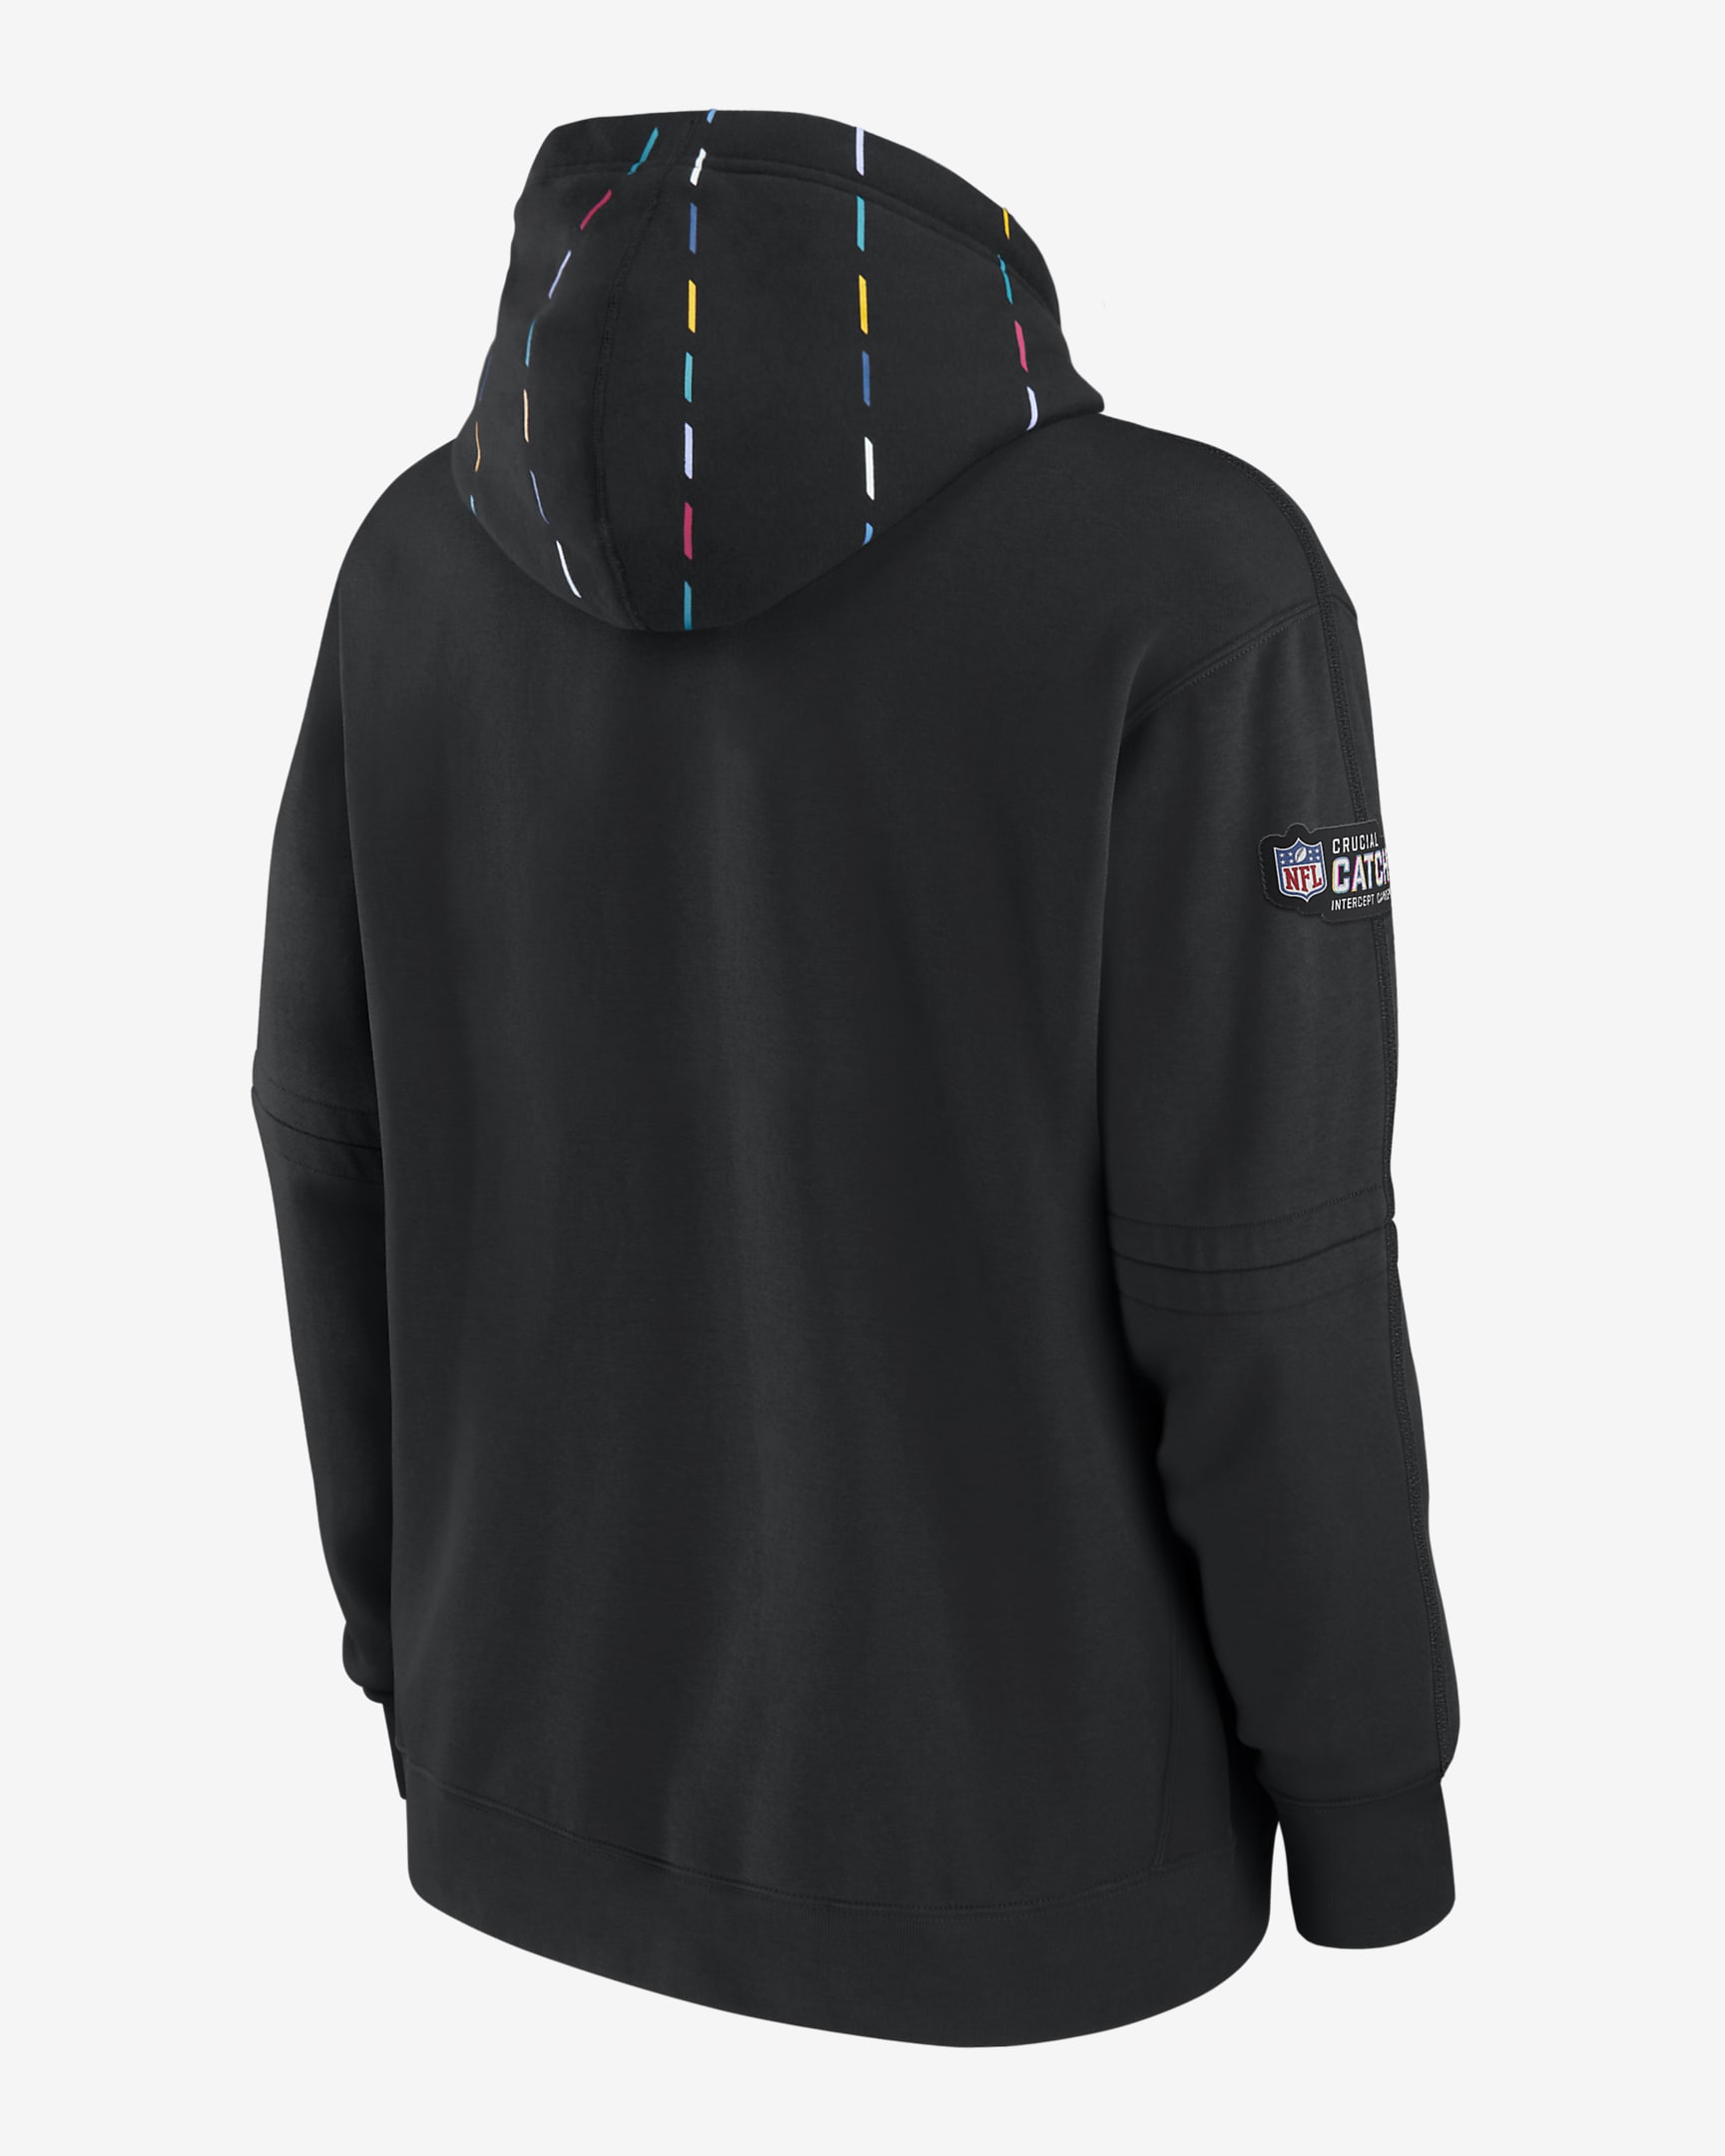 Indianapolis Colts Crucial Catch Club Men's Nike NFL Pullover Hoodie ...